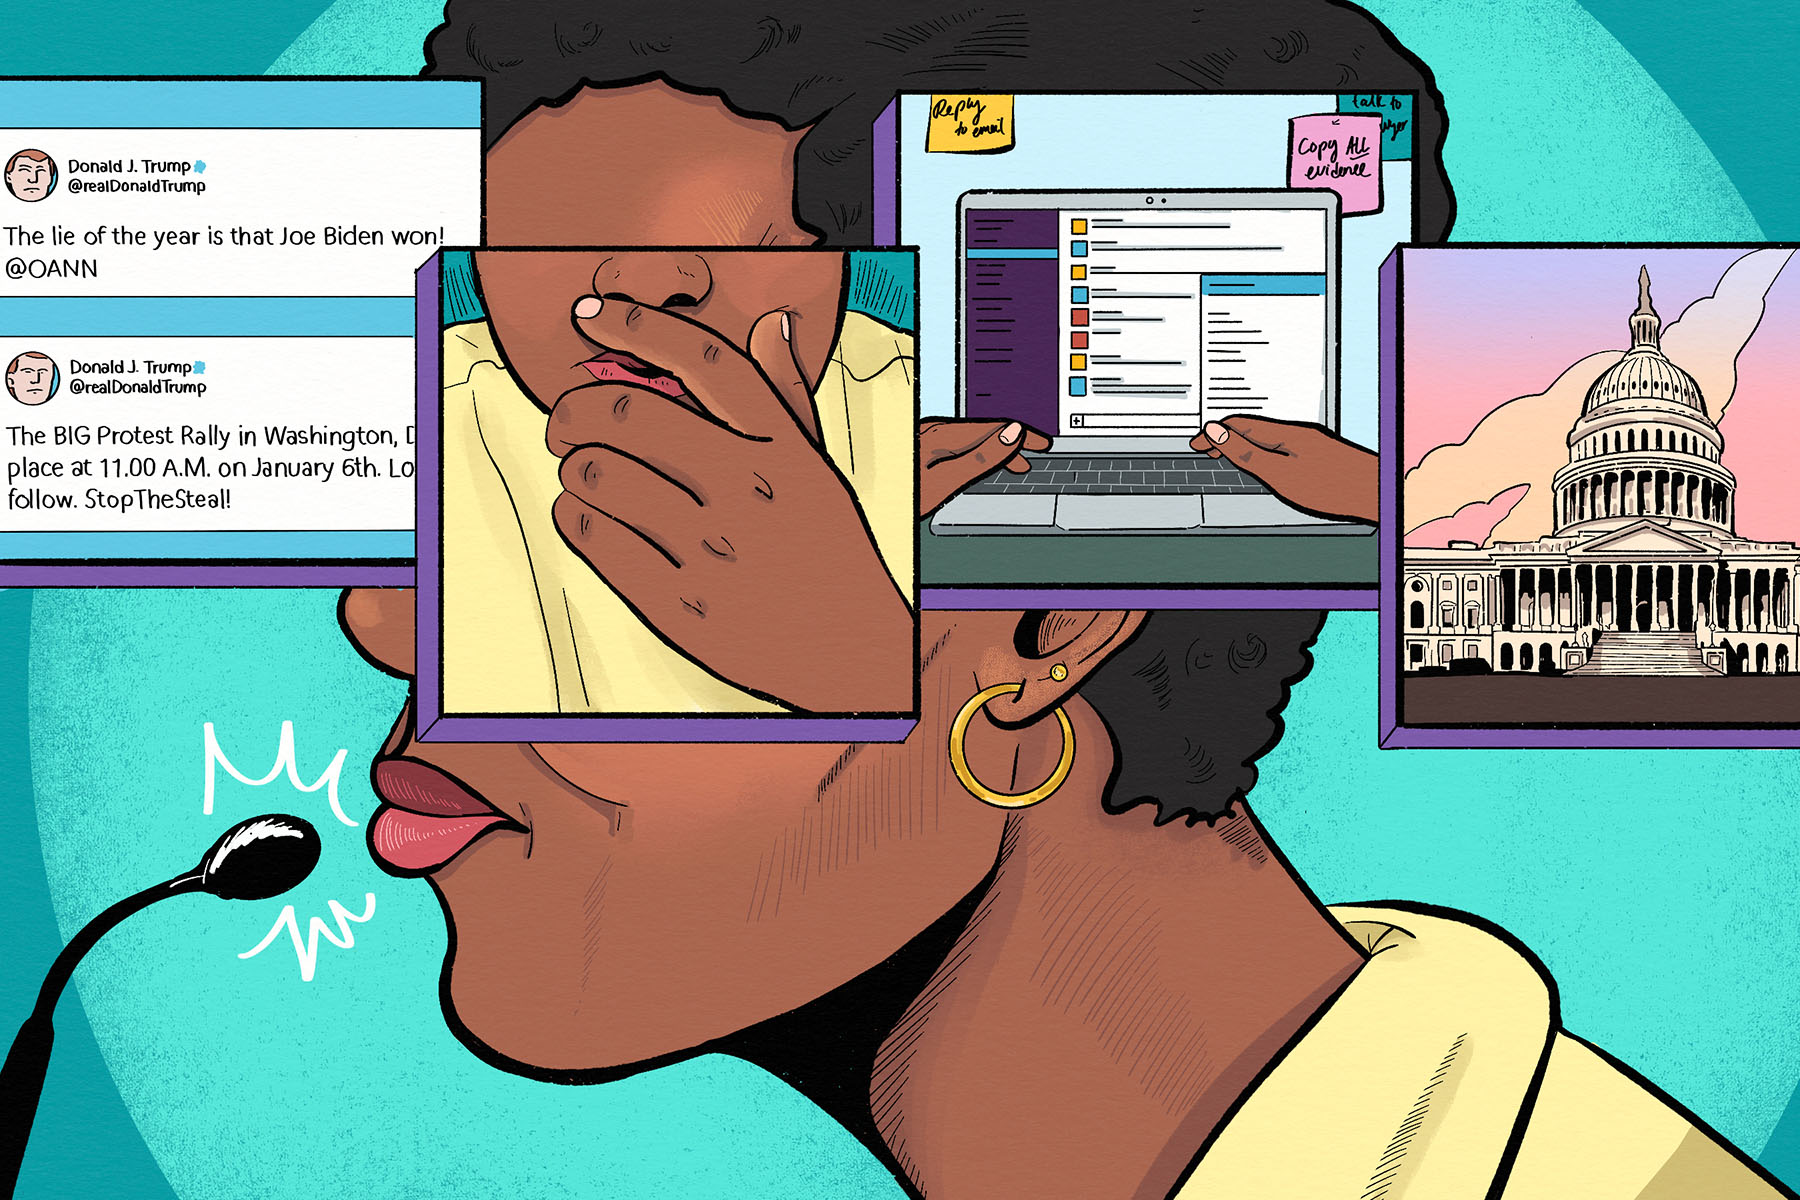 Illustration of the side profile of a Black woman with short hair speaking into a microphone; the upper half of her face is obscured with square vignettes showing Trump’s tweets, a closeup of her hand over her mouth, a laptop showing a Slack conversation, and the Capitol building.